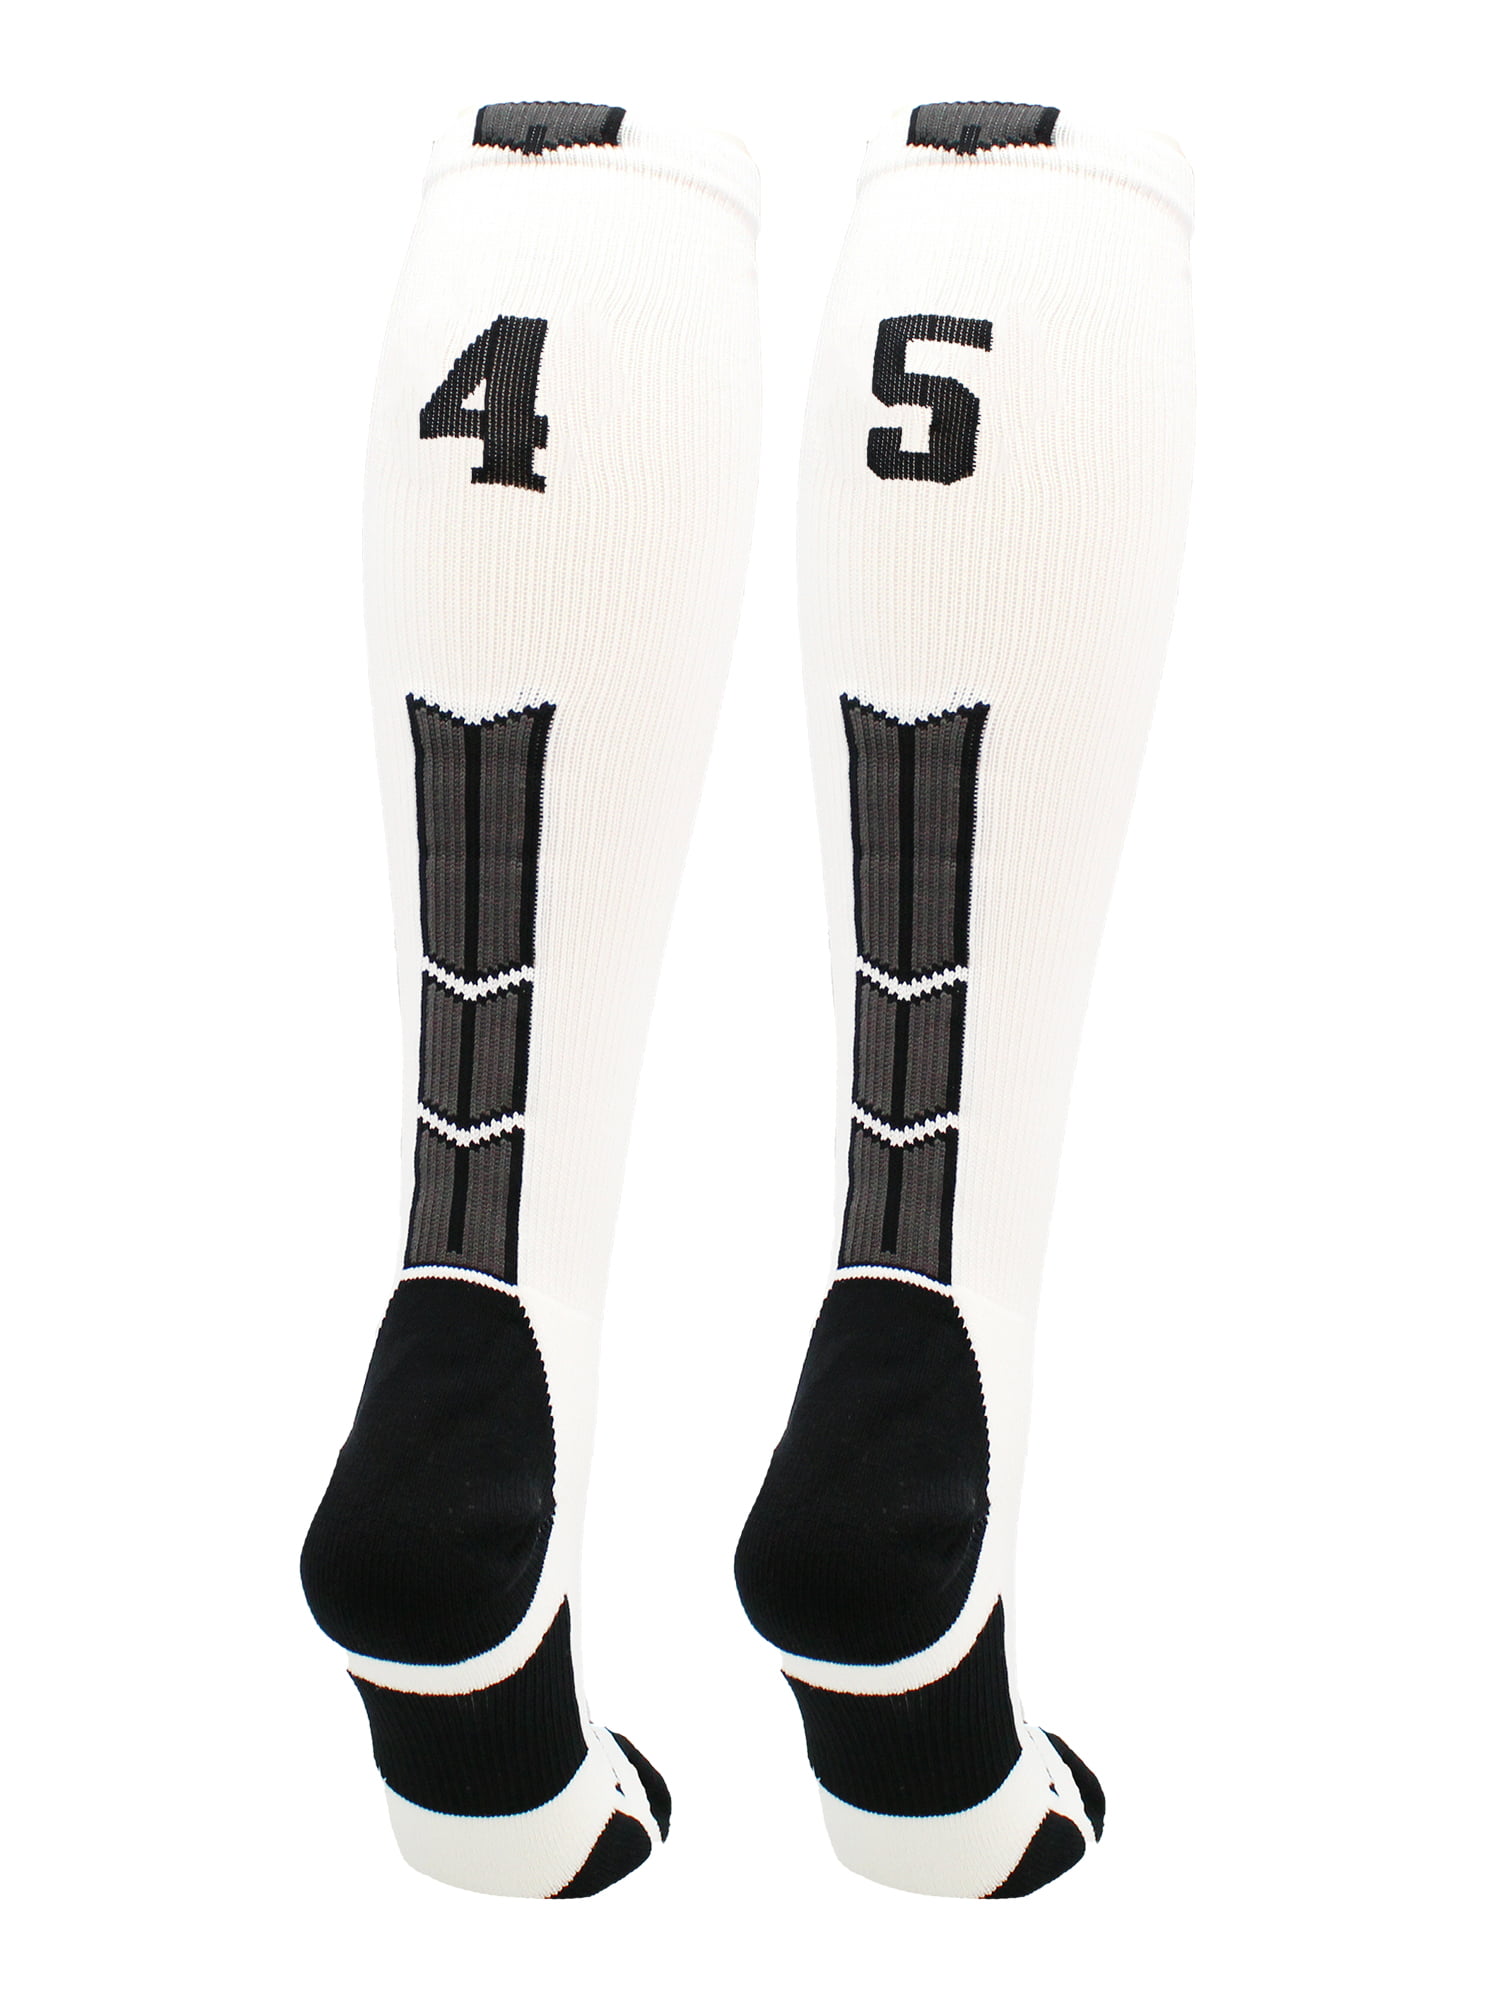 Player Id Jersey Number Socks Over the Calf Length Black and White 